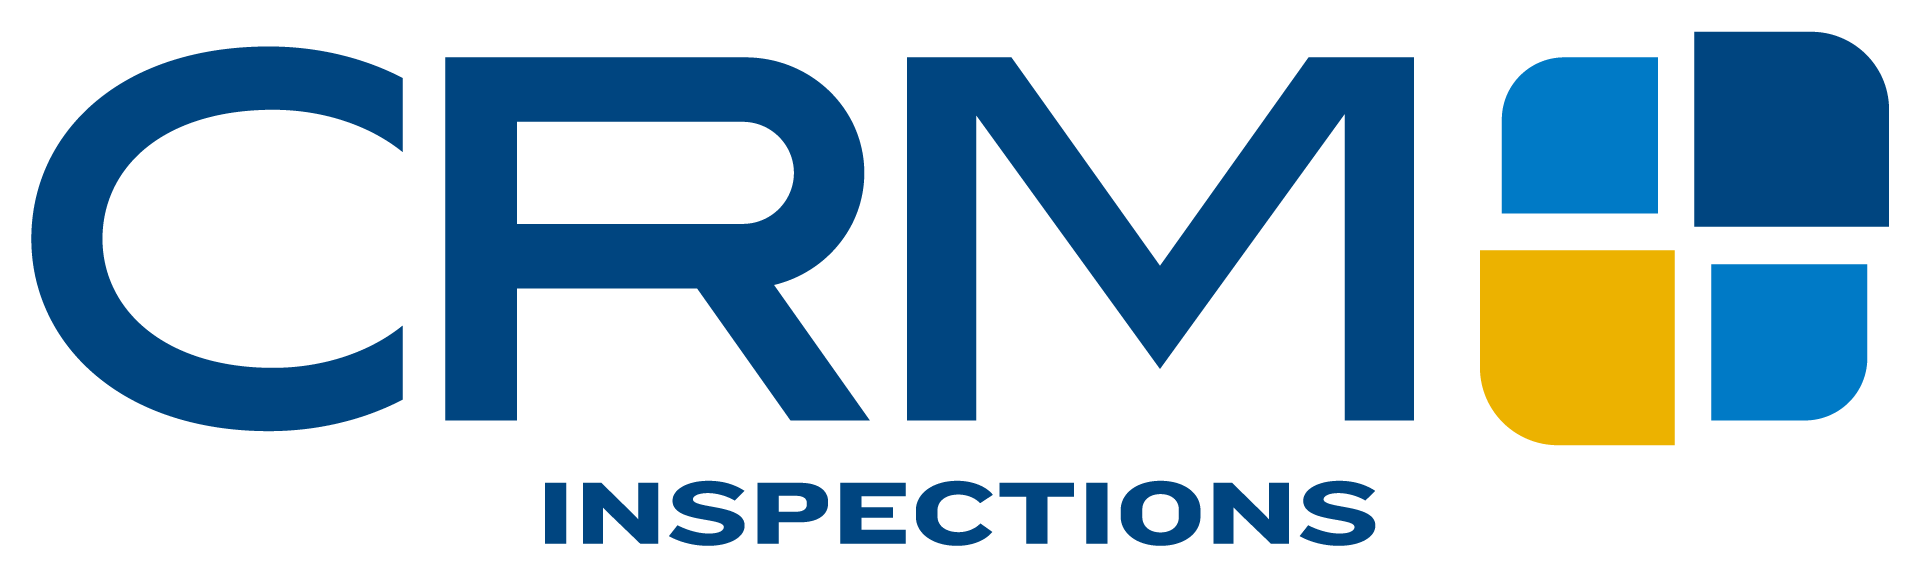 CRM Logo, Your Property, Our Priority. The total solution. CRM specializes in meeting the needs of a large client base throughout the US. We provide services for Resort & Owner representatives, Hotels, Developers, Property Management Companies, Commercial, Residential and Multi-family properties. Our services include Renovation/Construction, Design, Property Services, Contract Maintenance, and Inspections.